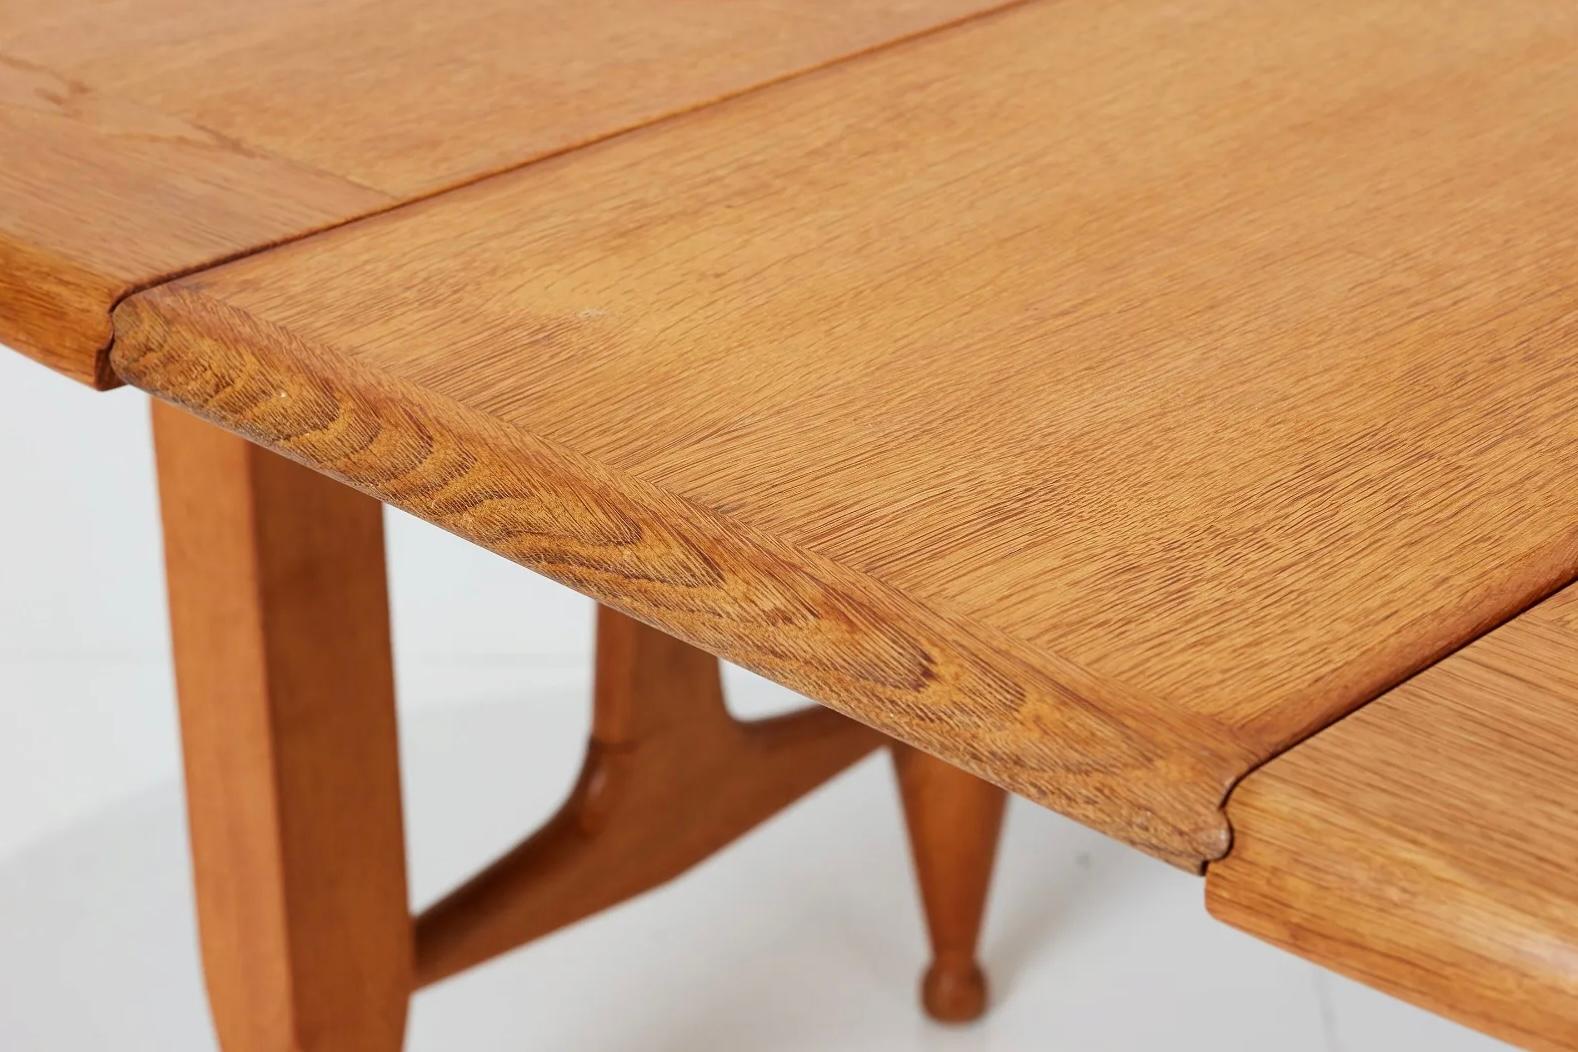 Blond oak center table or dining table by Guillerme & Chambron for Votre Maison For Sale 1